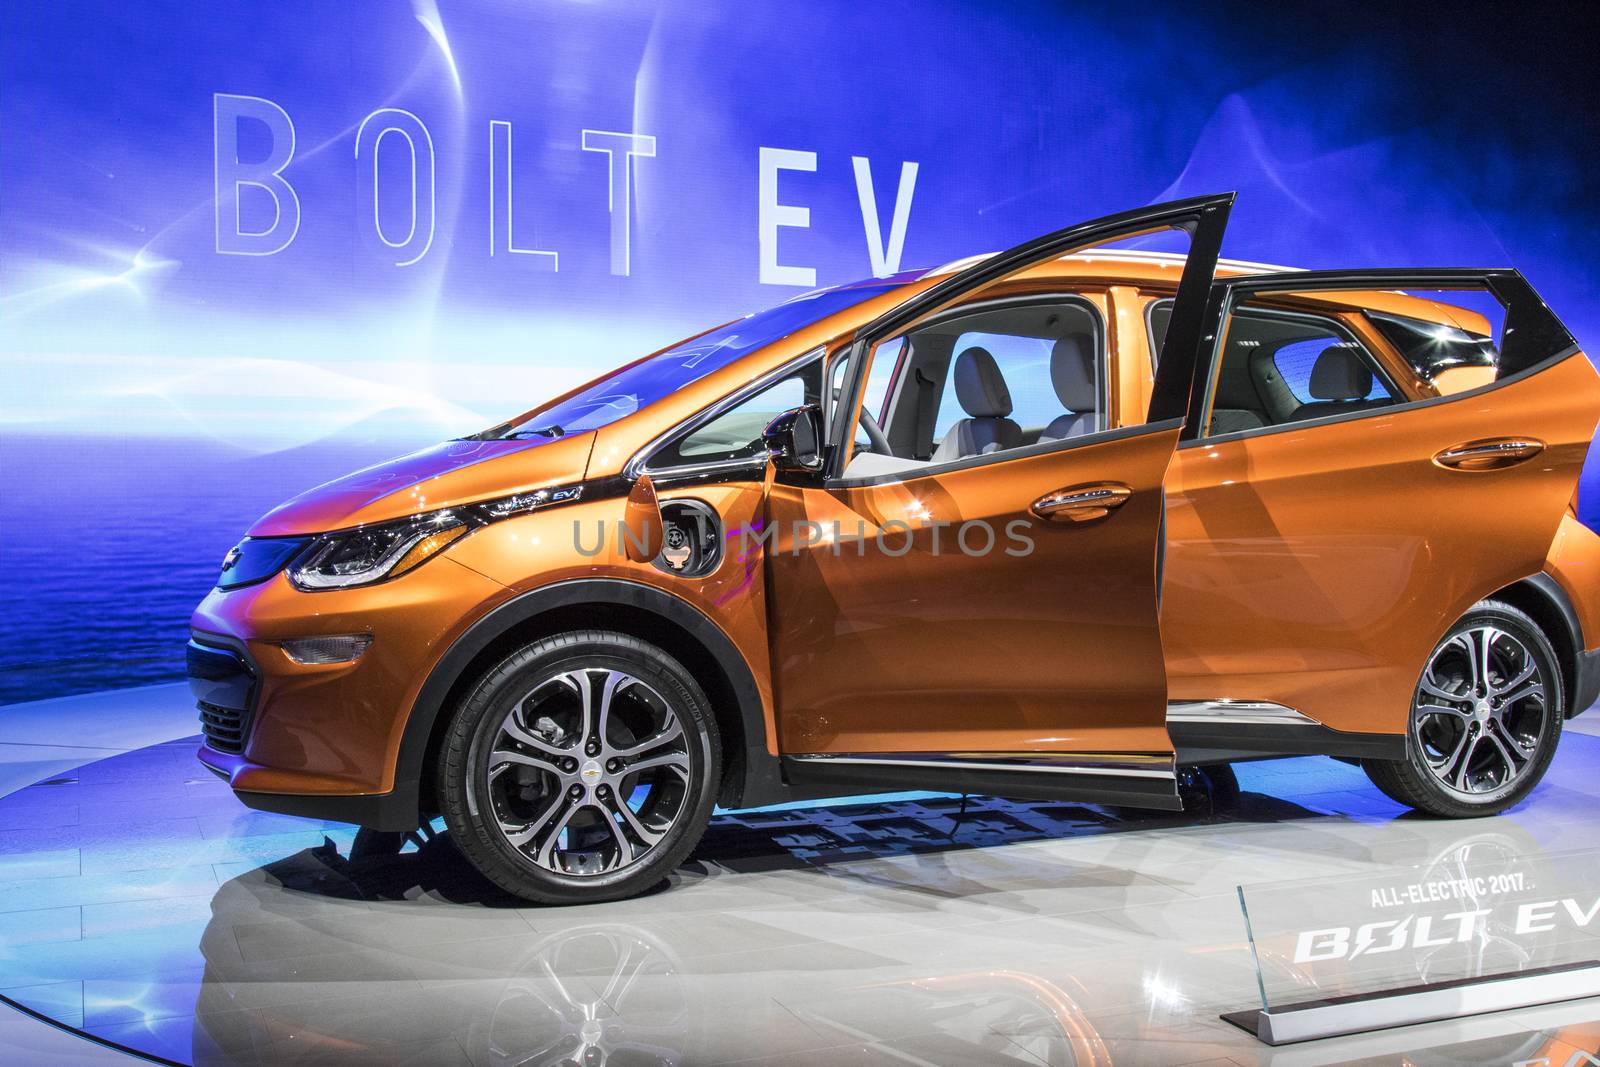 DETROIT - JANUARY 17 :The 2017 Chevrolet Bolt EV at The North American International Auto Show January 17, 2016 in Detroit, Michigan.